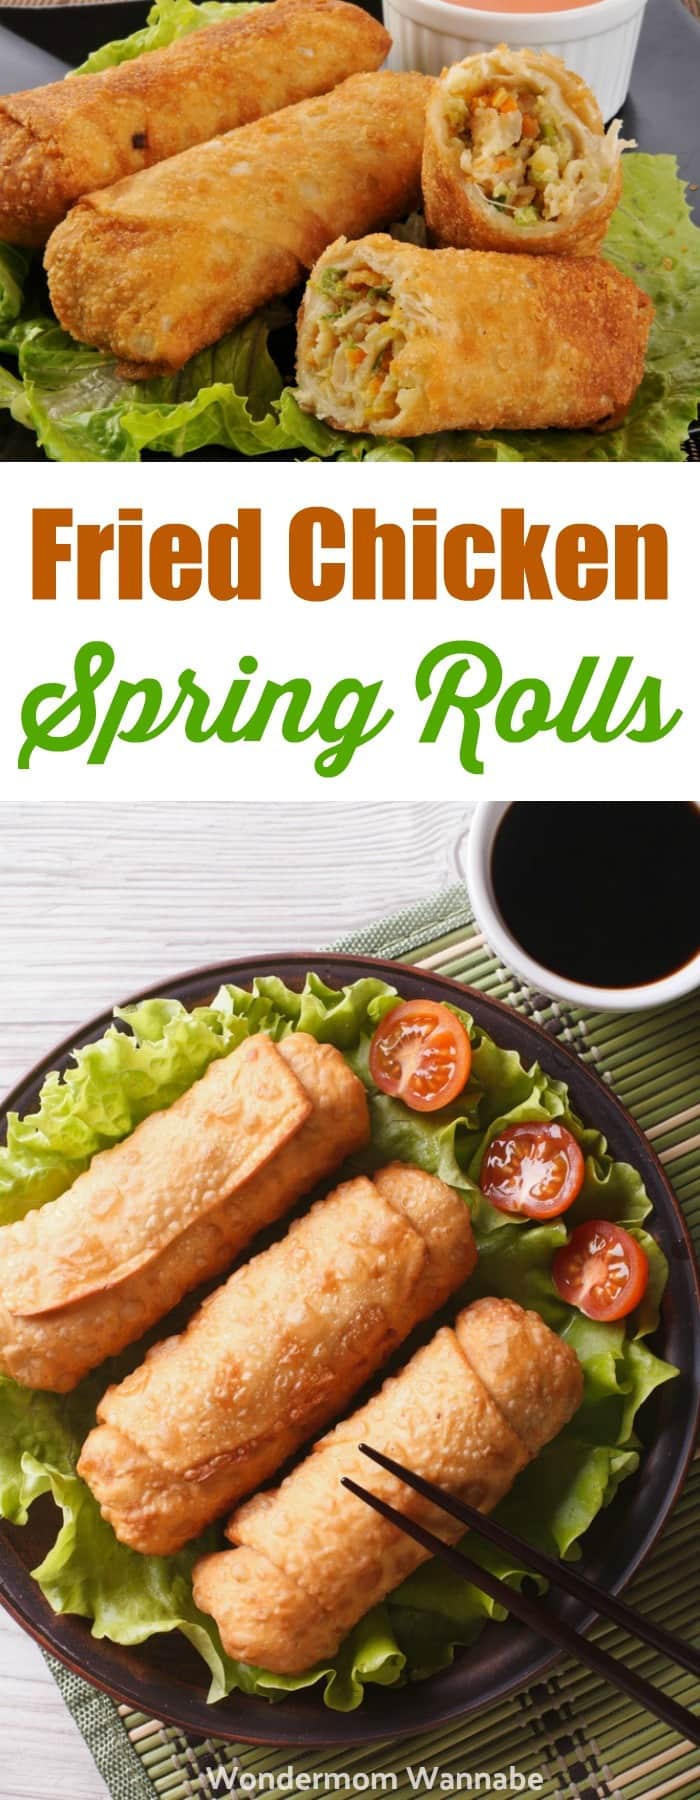 These fried chicken spring rolls are so yummy as an appetizer or as a side dish for your favorite Asian dinner! #asianfood #springrolls #appetizer #sidedish via @wondermomwannab